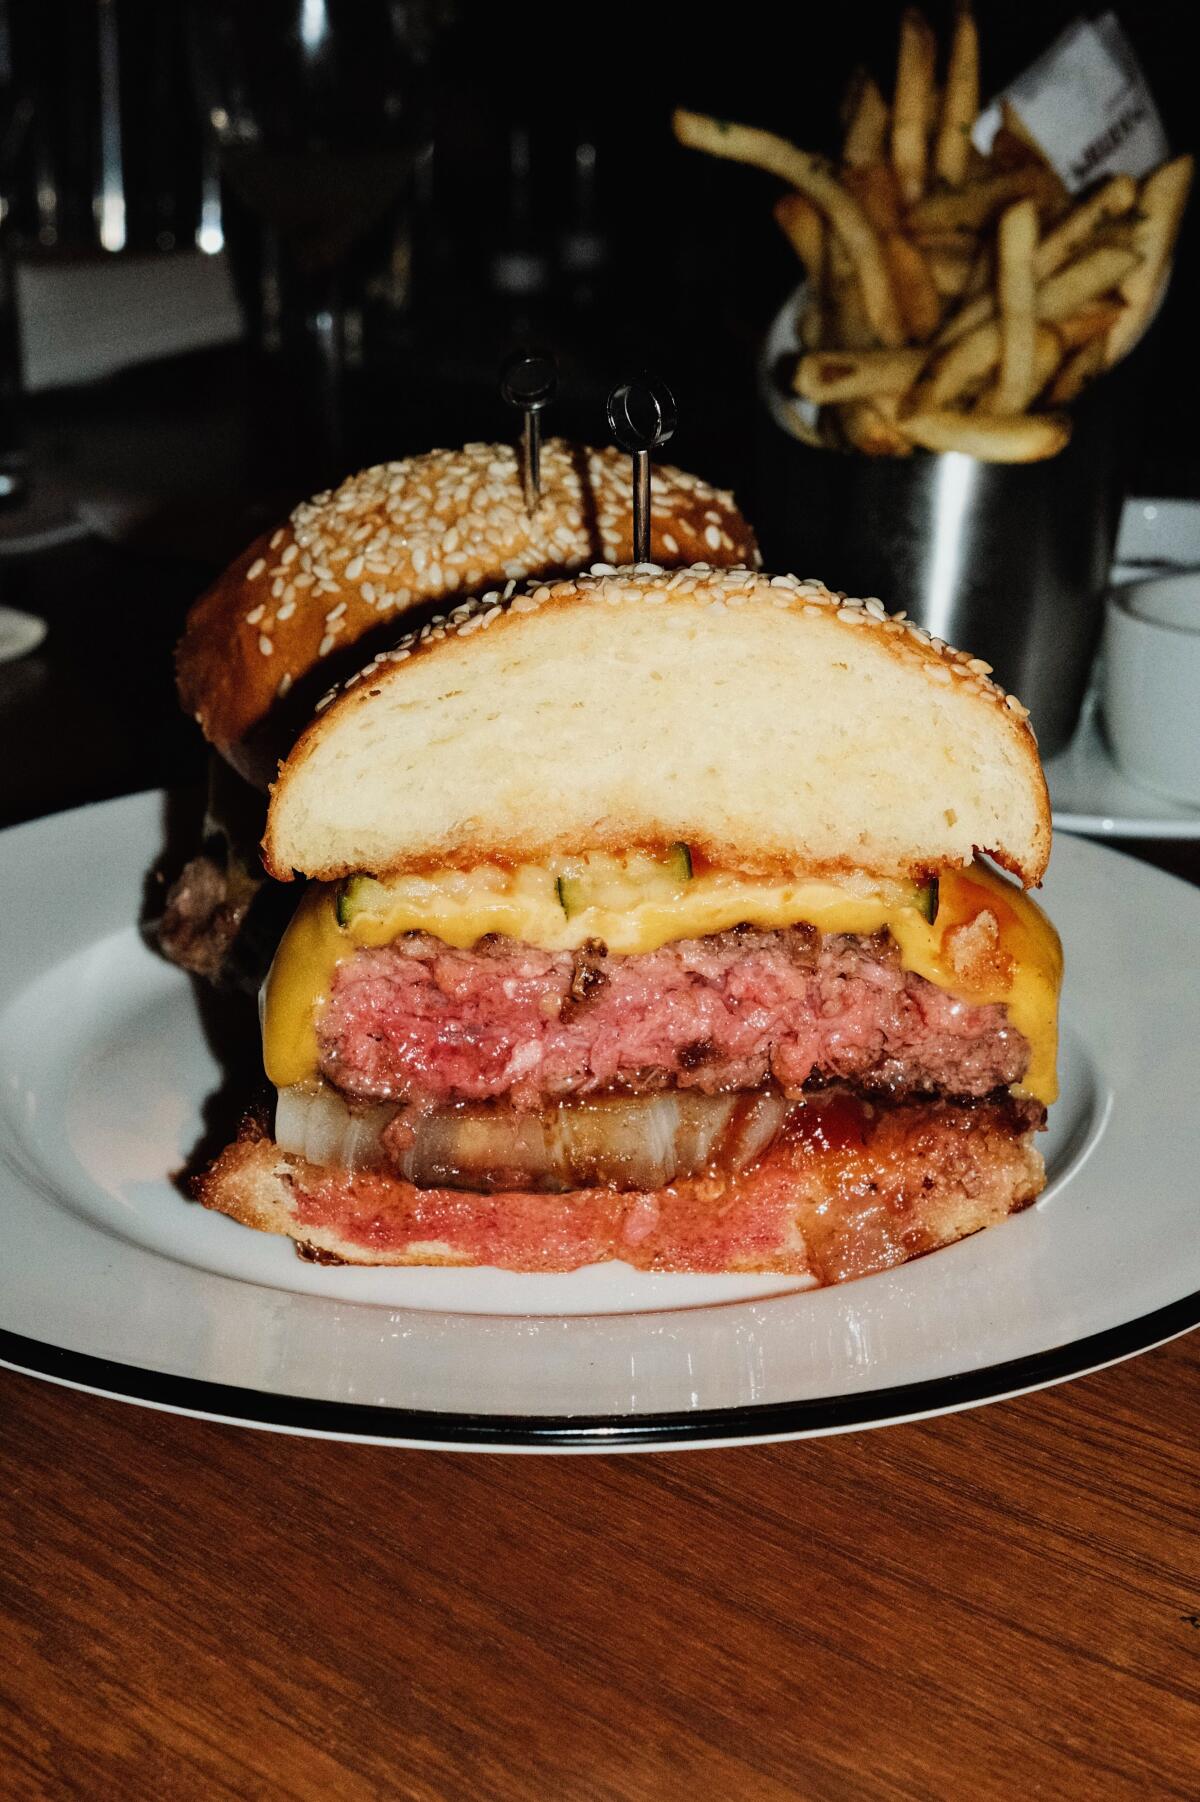 The cheeseburger at the Benjamin, cut in half, on a white plate. French fries are seen in the background.